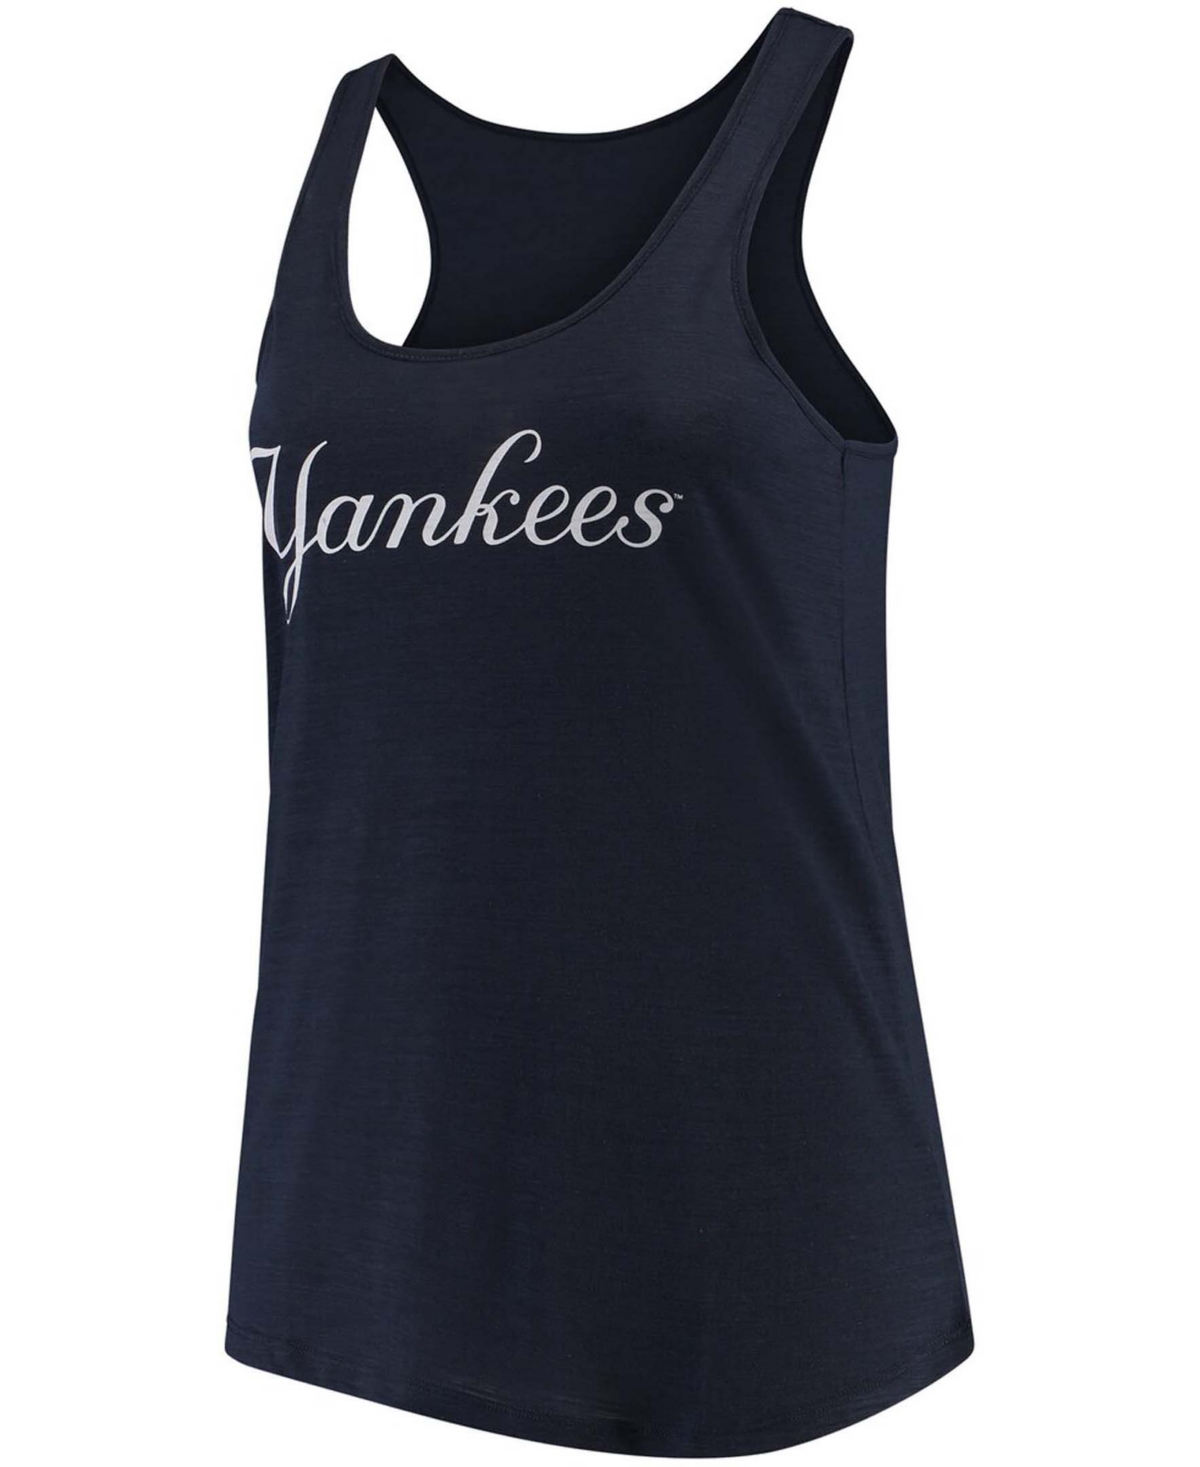 Women's Plus Size Navy New York Yankees Swing For The Fences Racerback Tank Top - Navy